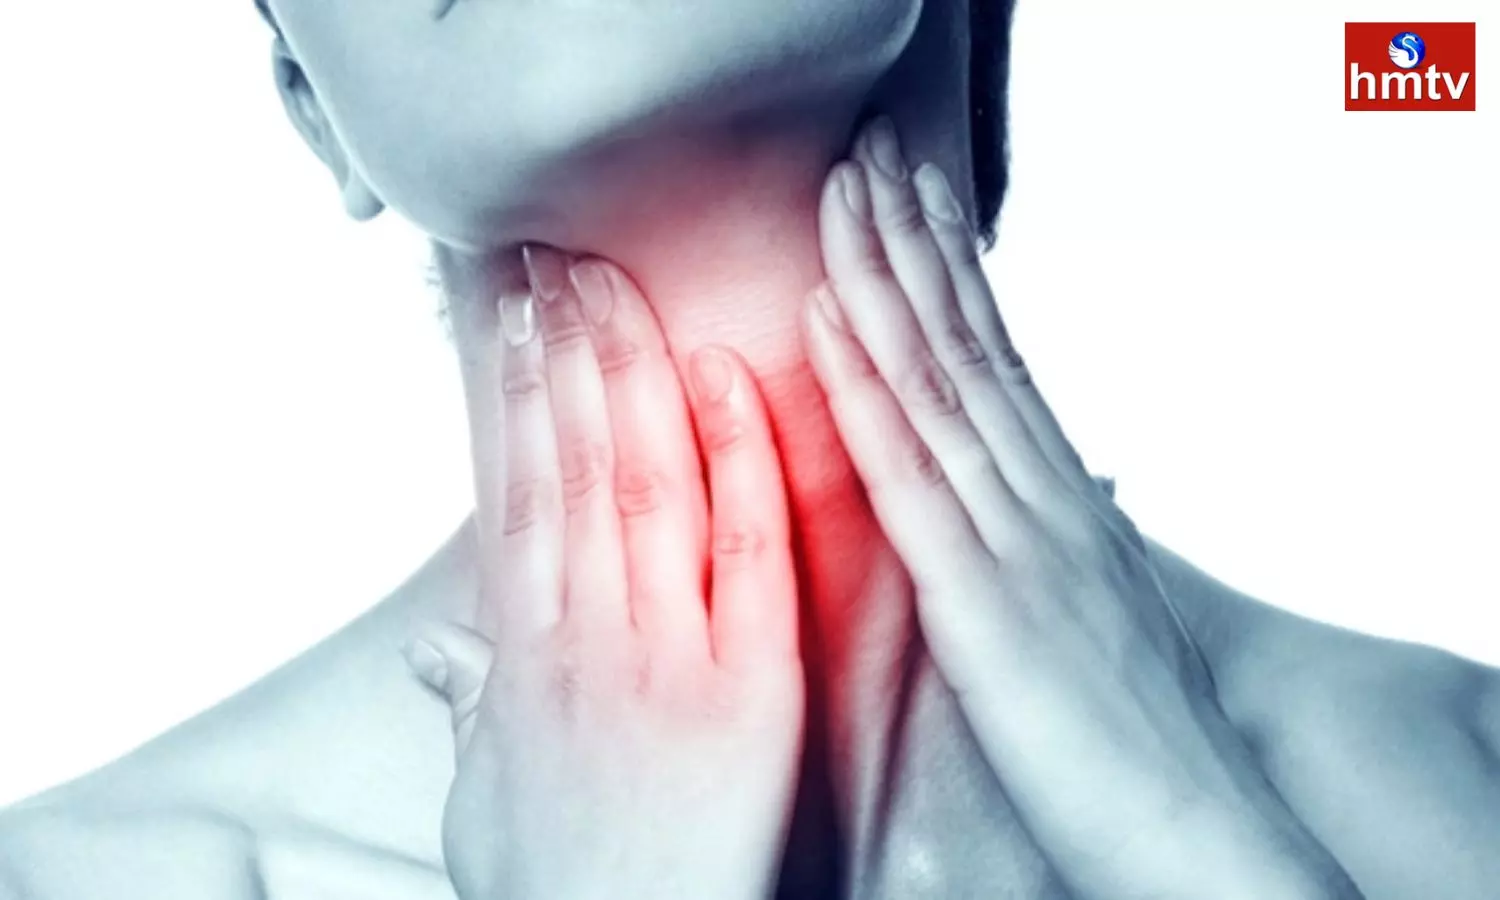 Not only cold but these 8 causes of sore throat avoid it like this